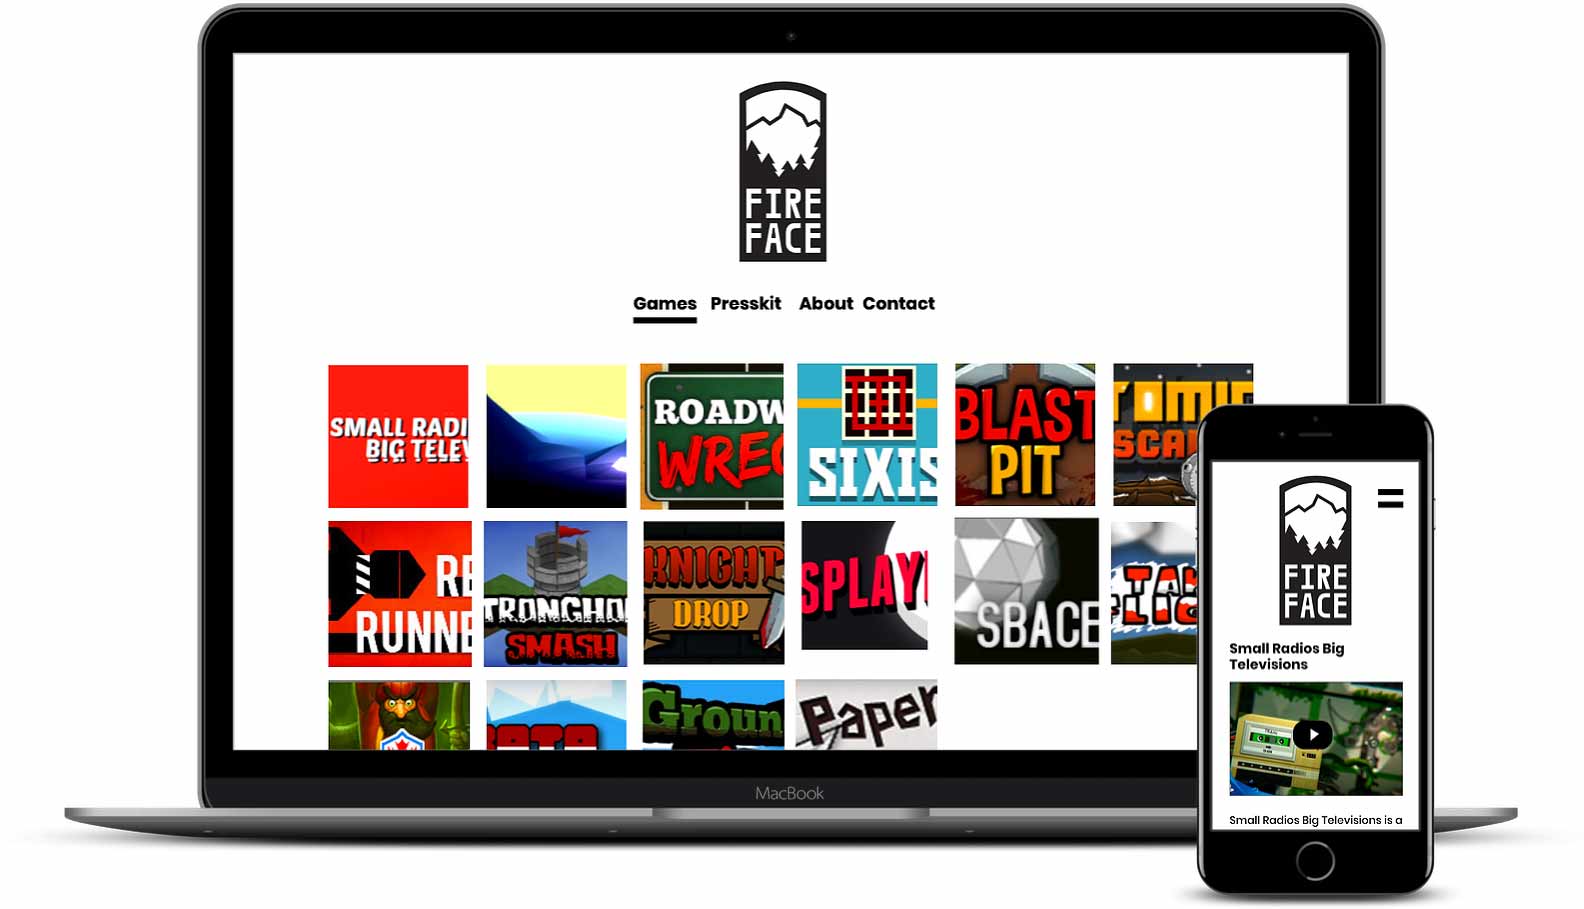 Image of the Fire Face website mocked up on several different screen sizes